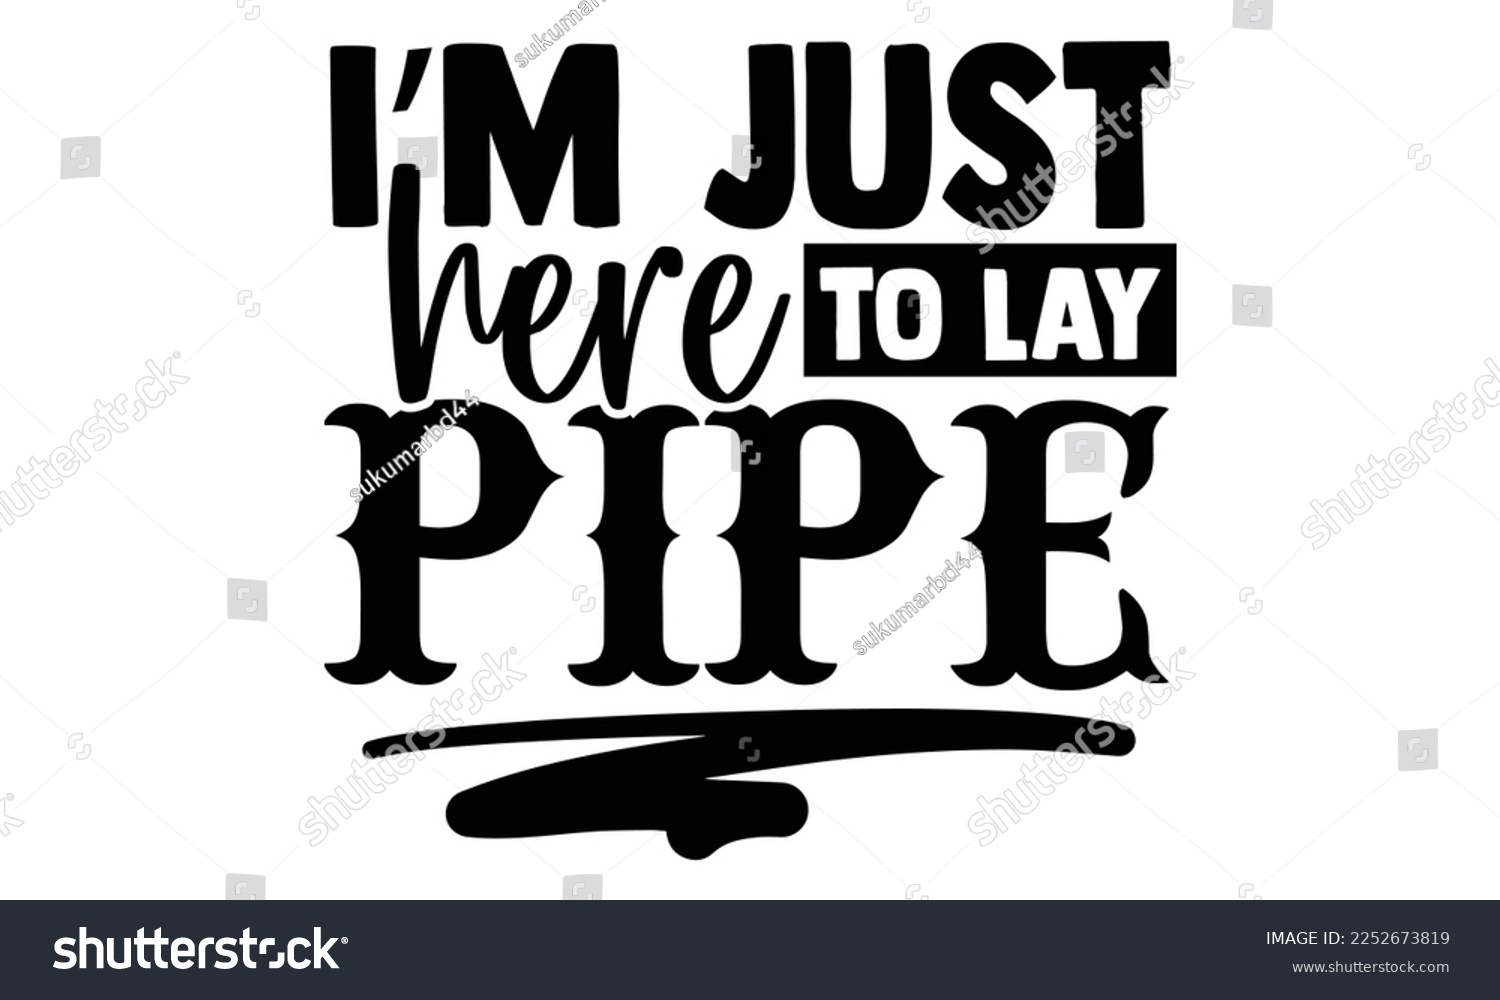 SVG of I’m Just Here To Lay Pipe - Plumber T shirt Design. Hand drawn lettering phrase, calligraphy vector illustration. eps, svg Files for Cutting svg